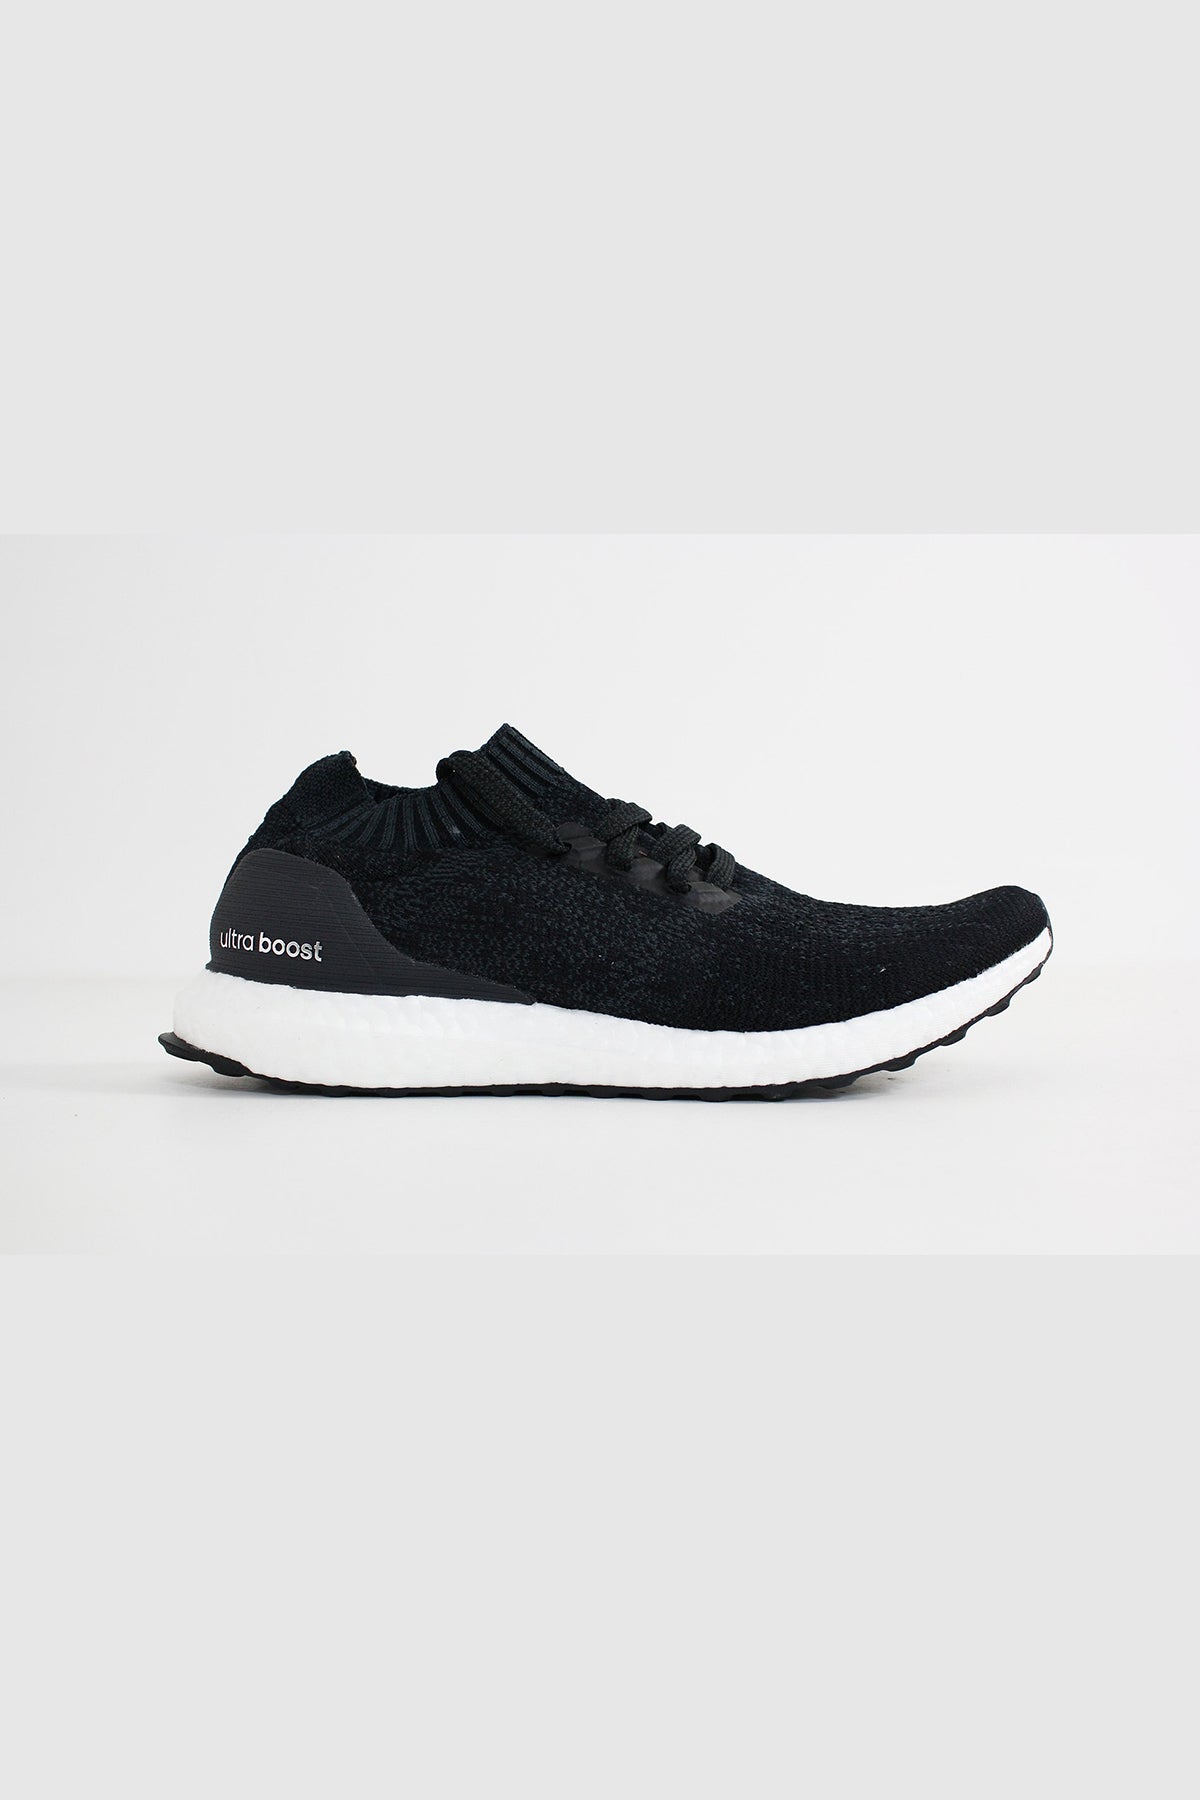 adidas ultra boost uncaged carbon